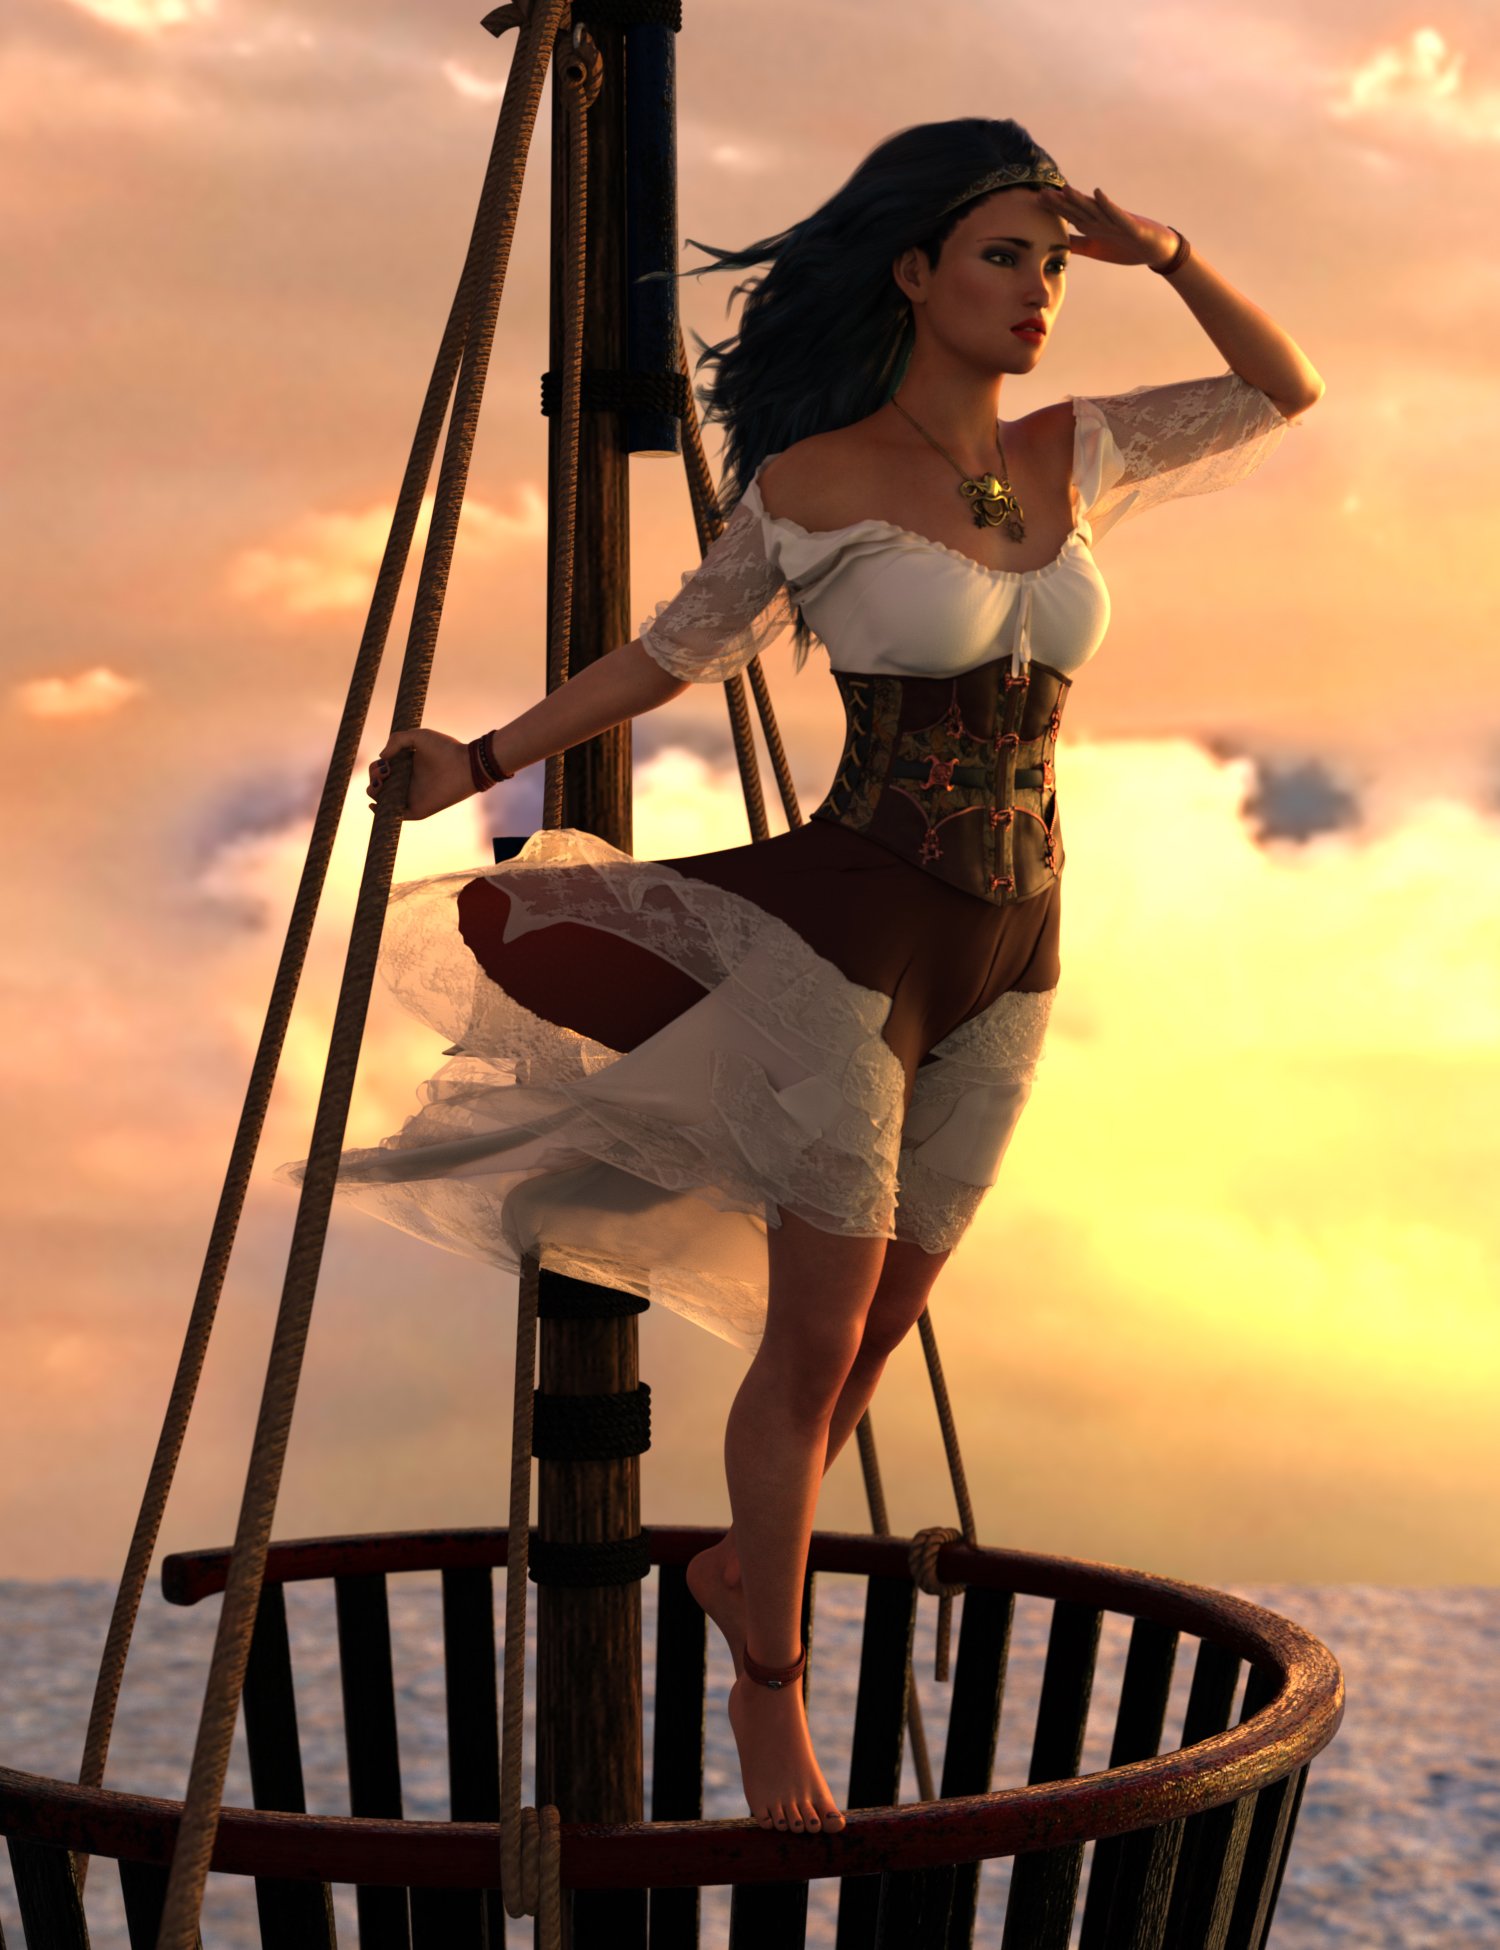 Swashbuckler Poses Props and Crows Nest for Genesis 8 by: Skyewolf, 3D Models by Daz 3D